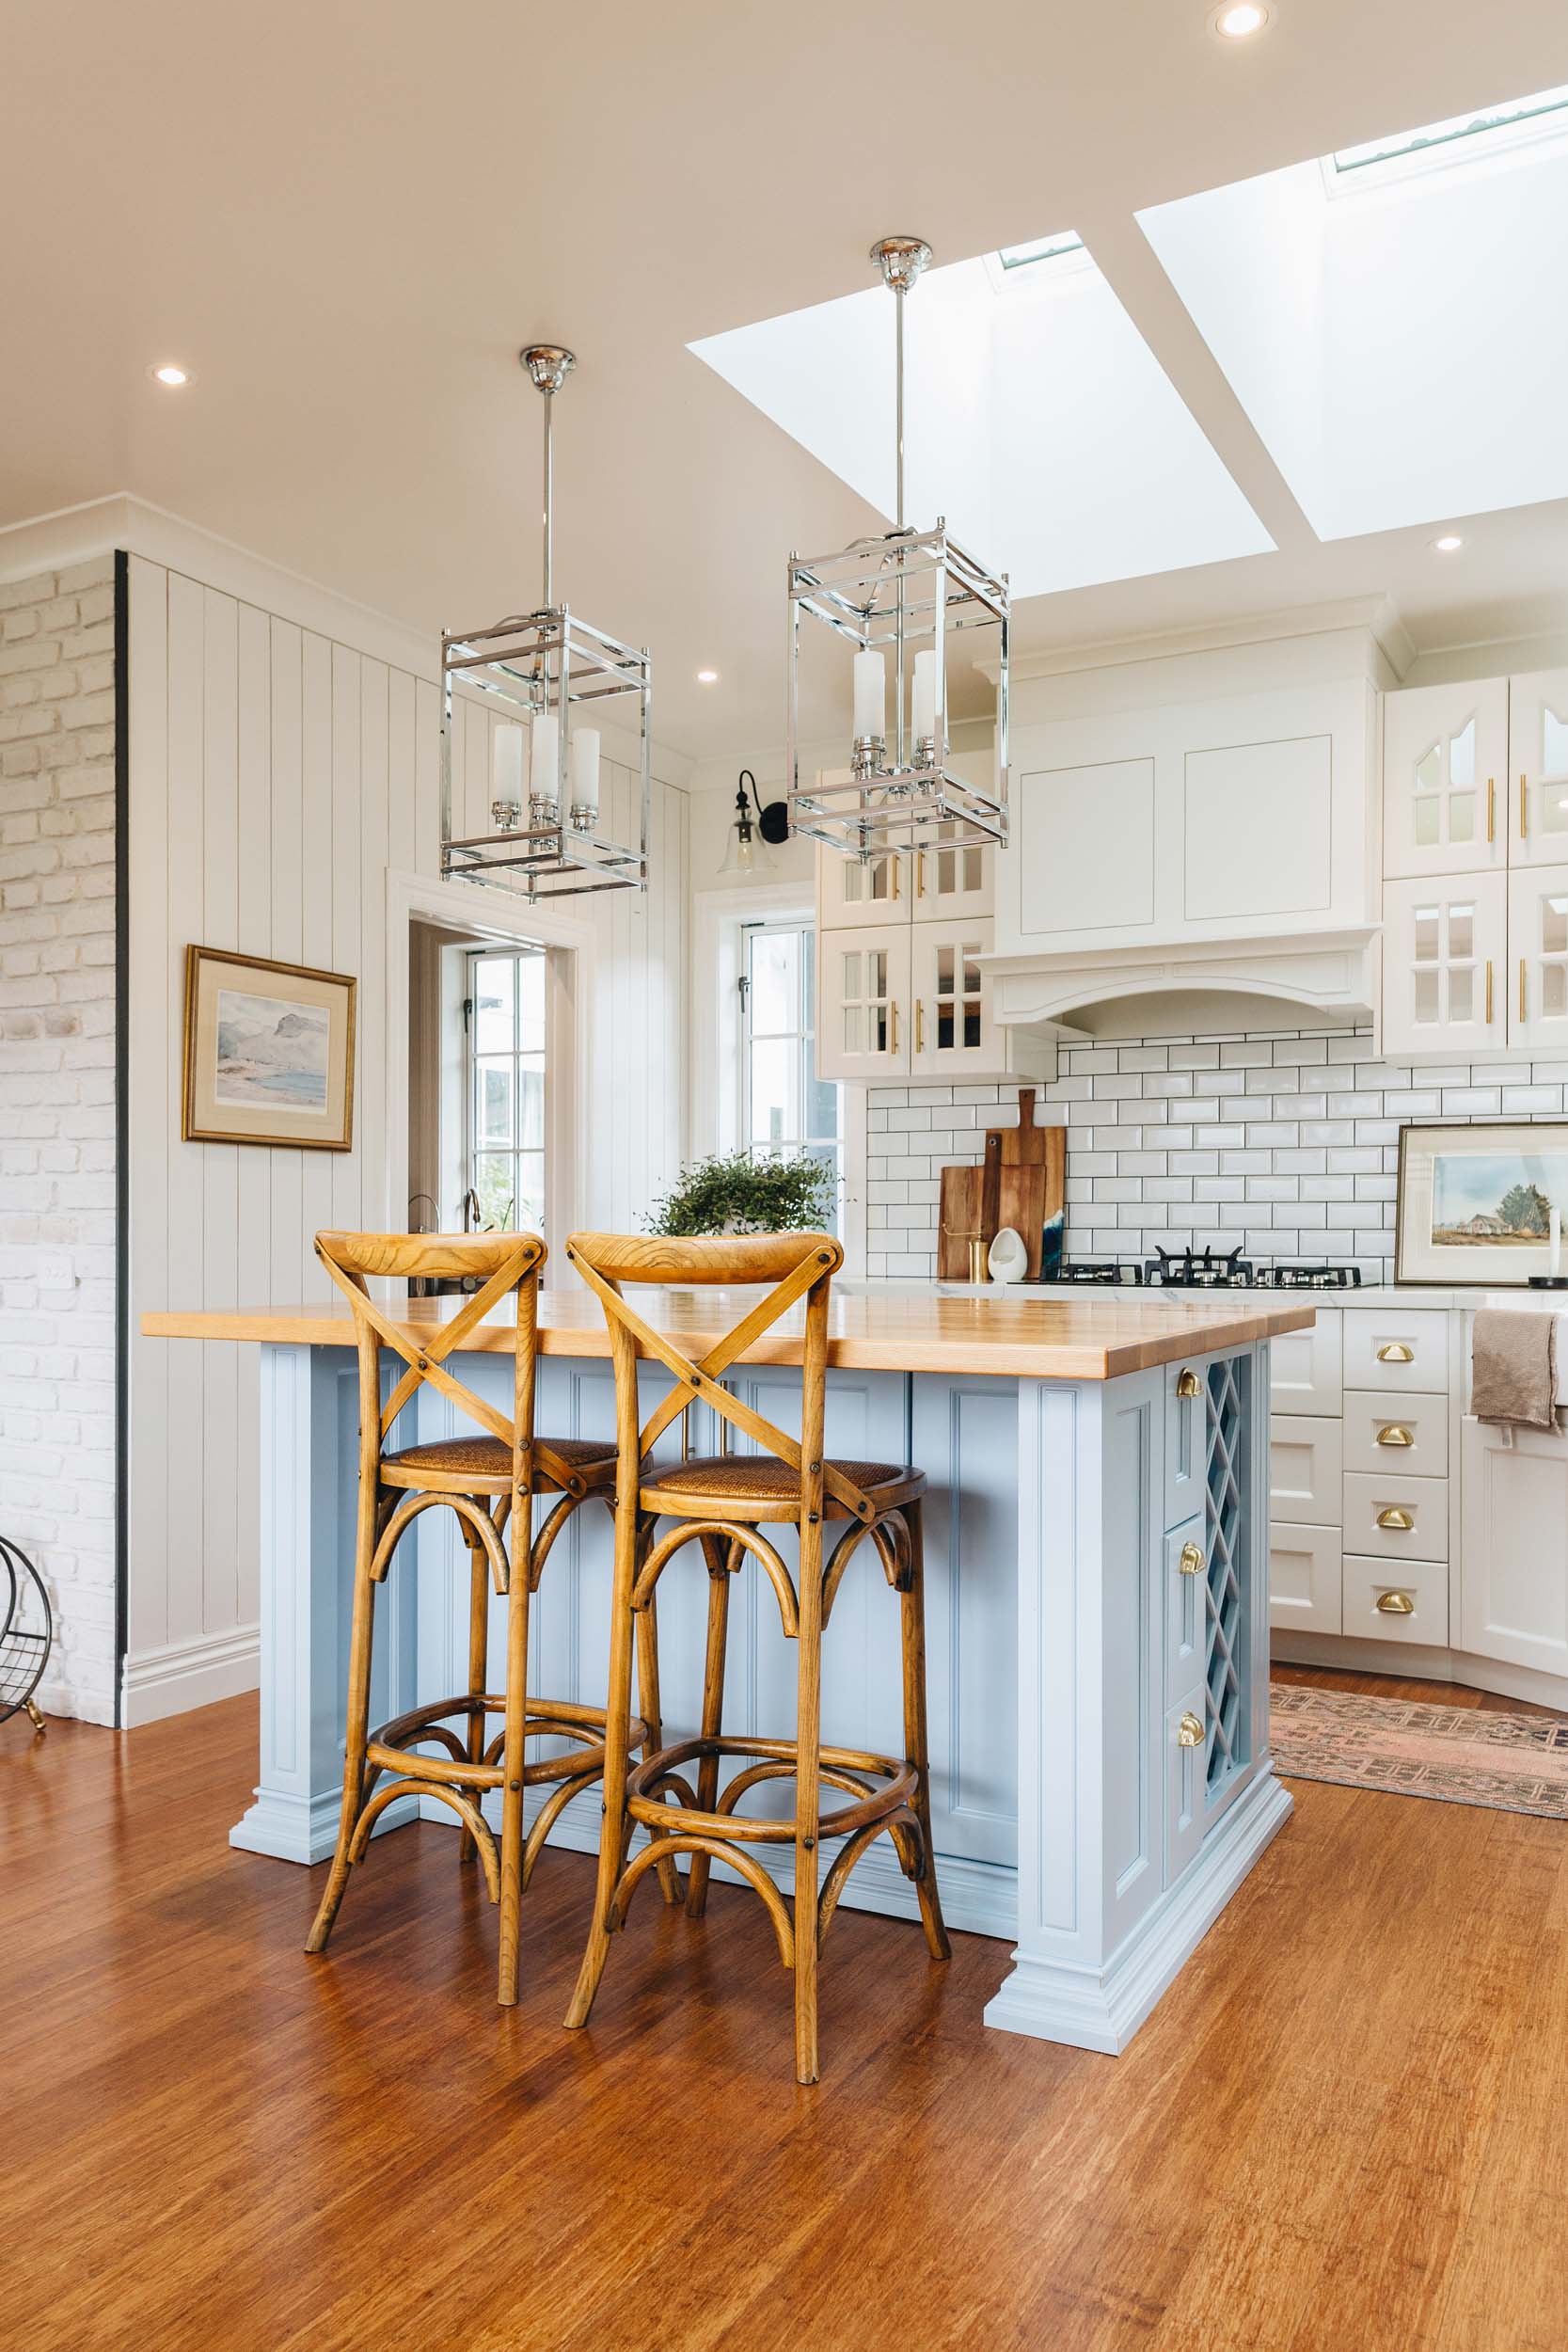 Baby blue kitchen island with the rest of the cabinets a white shade with brass hardware, white subway tiles